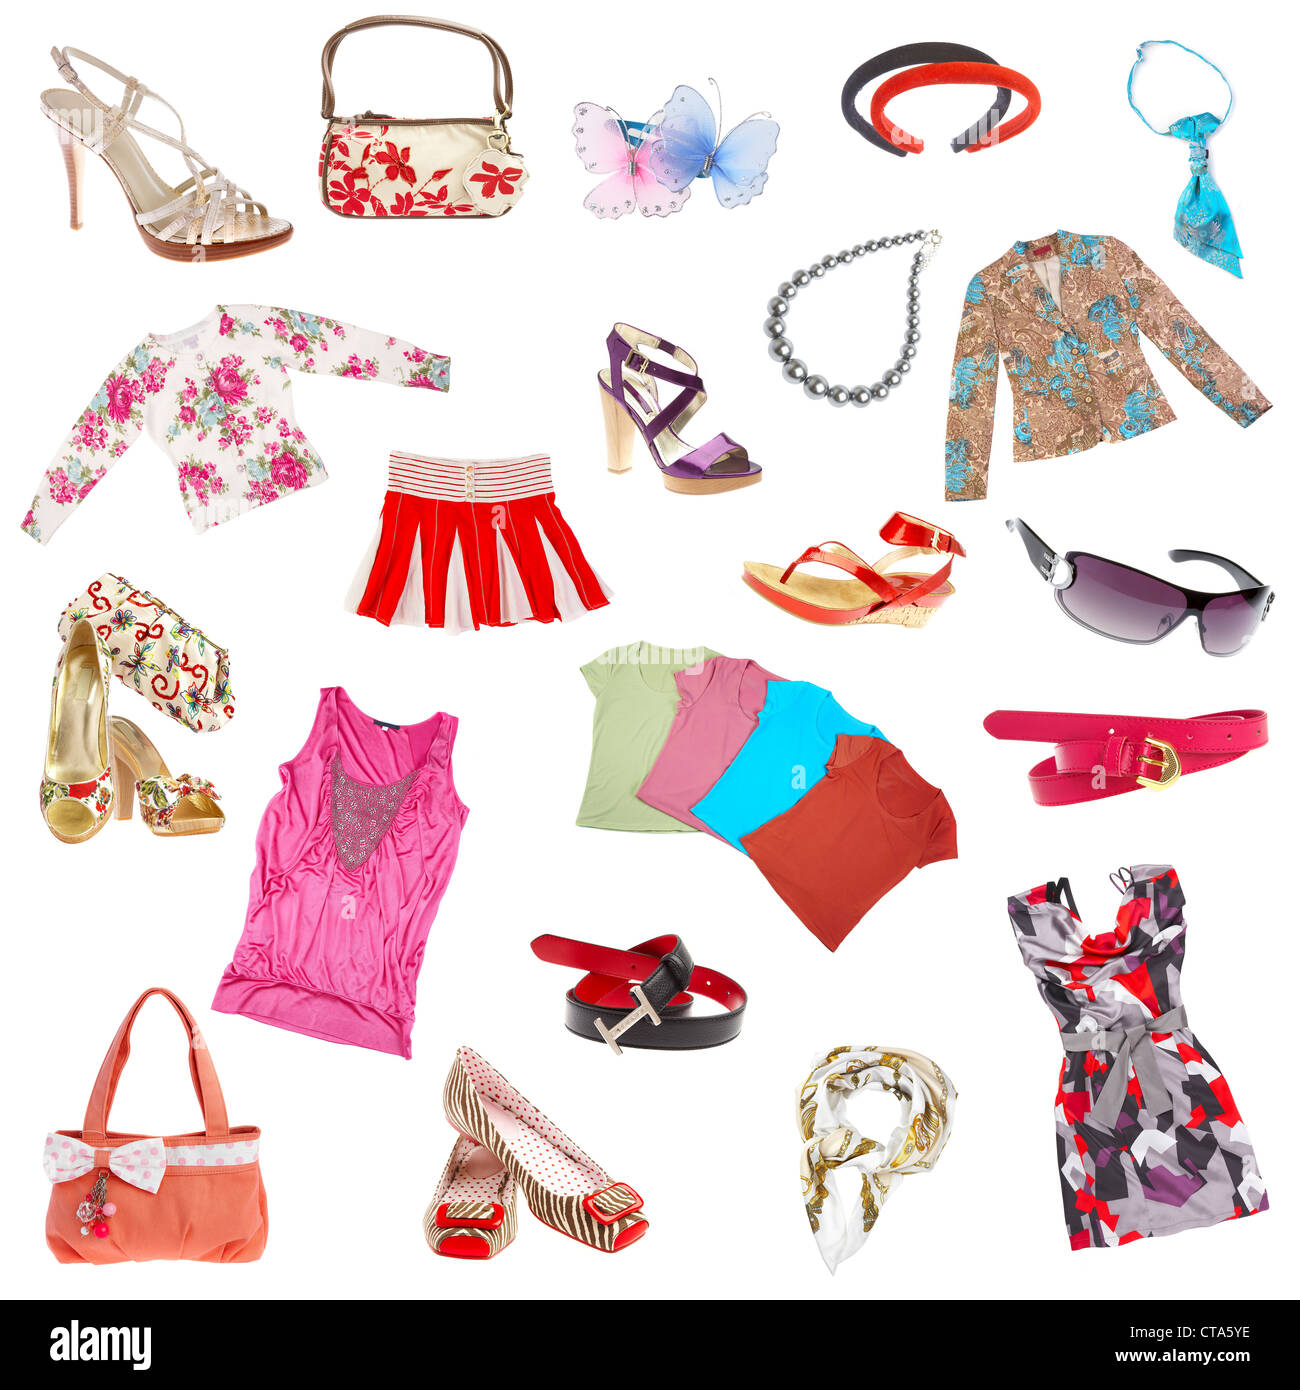 Lady's clothes and accessories on a white background Stock Photo